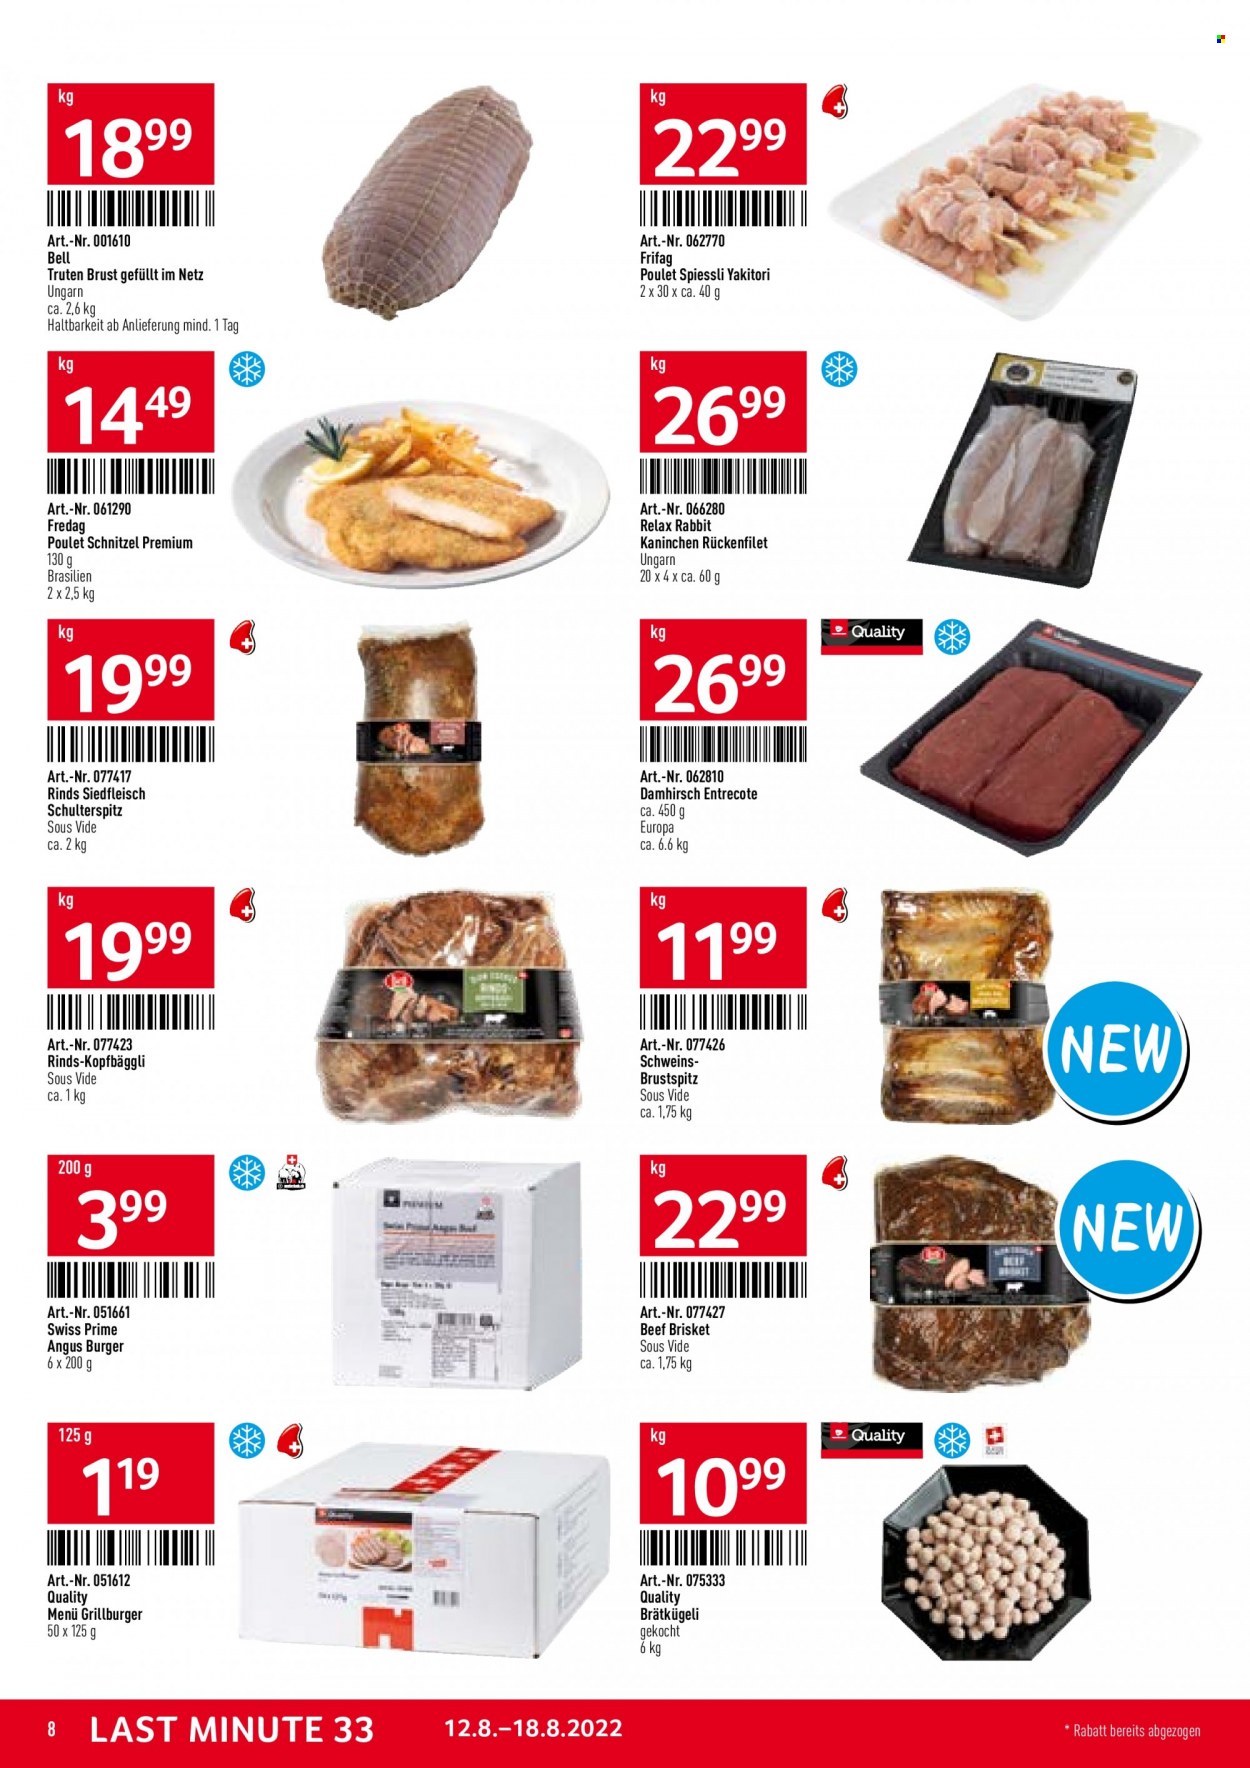 Catalogue TransGourmet - 12.8.2022 - 18.8.2022. Page 8.